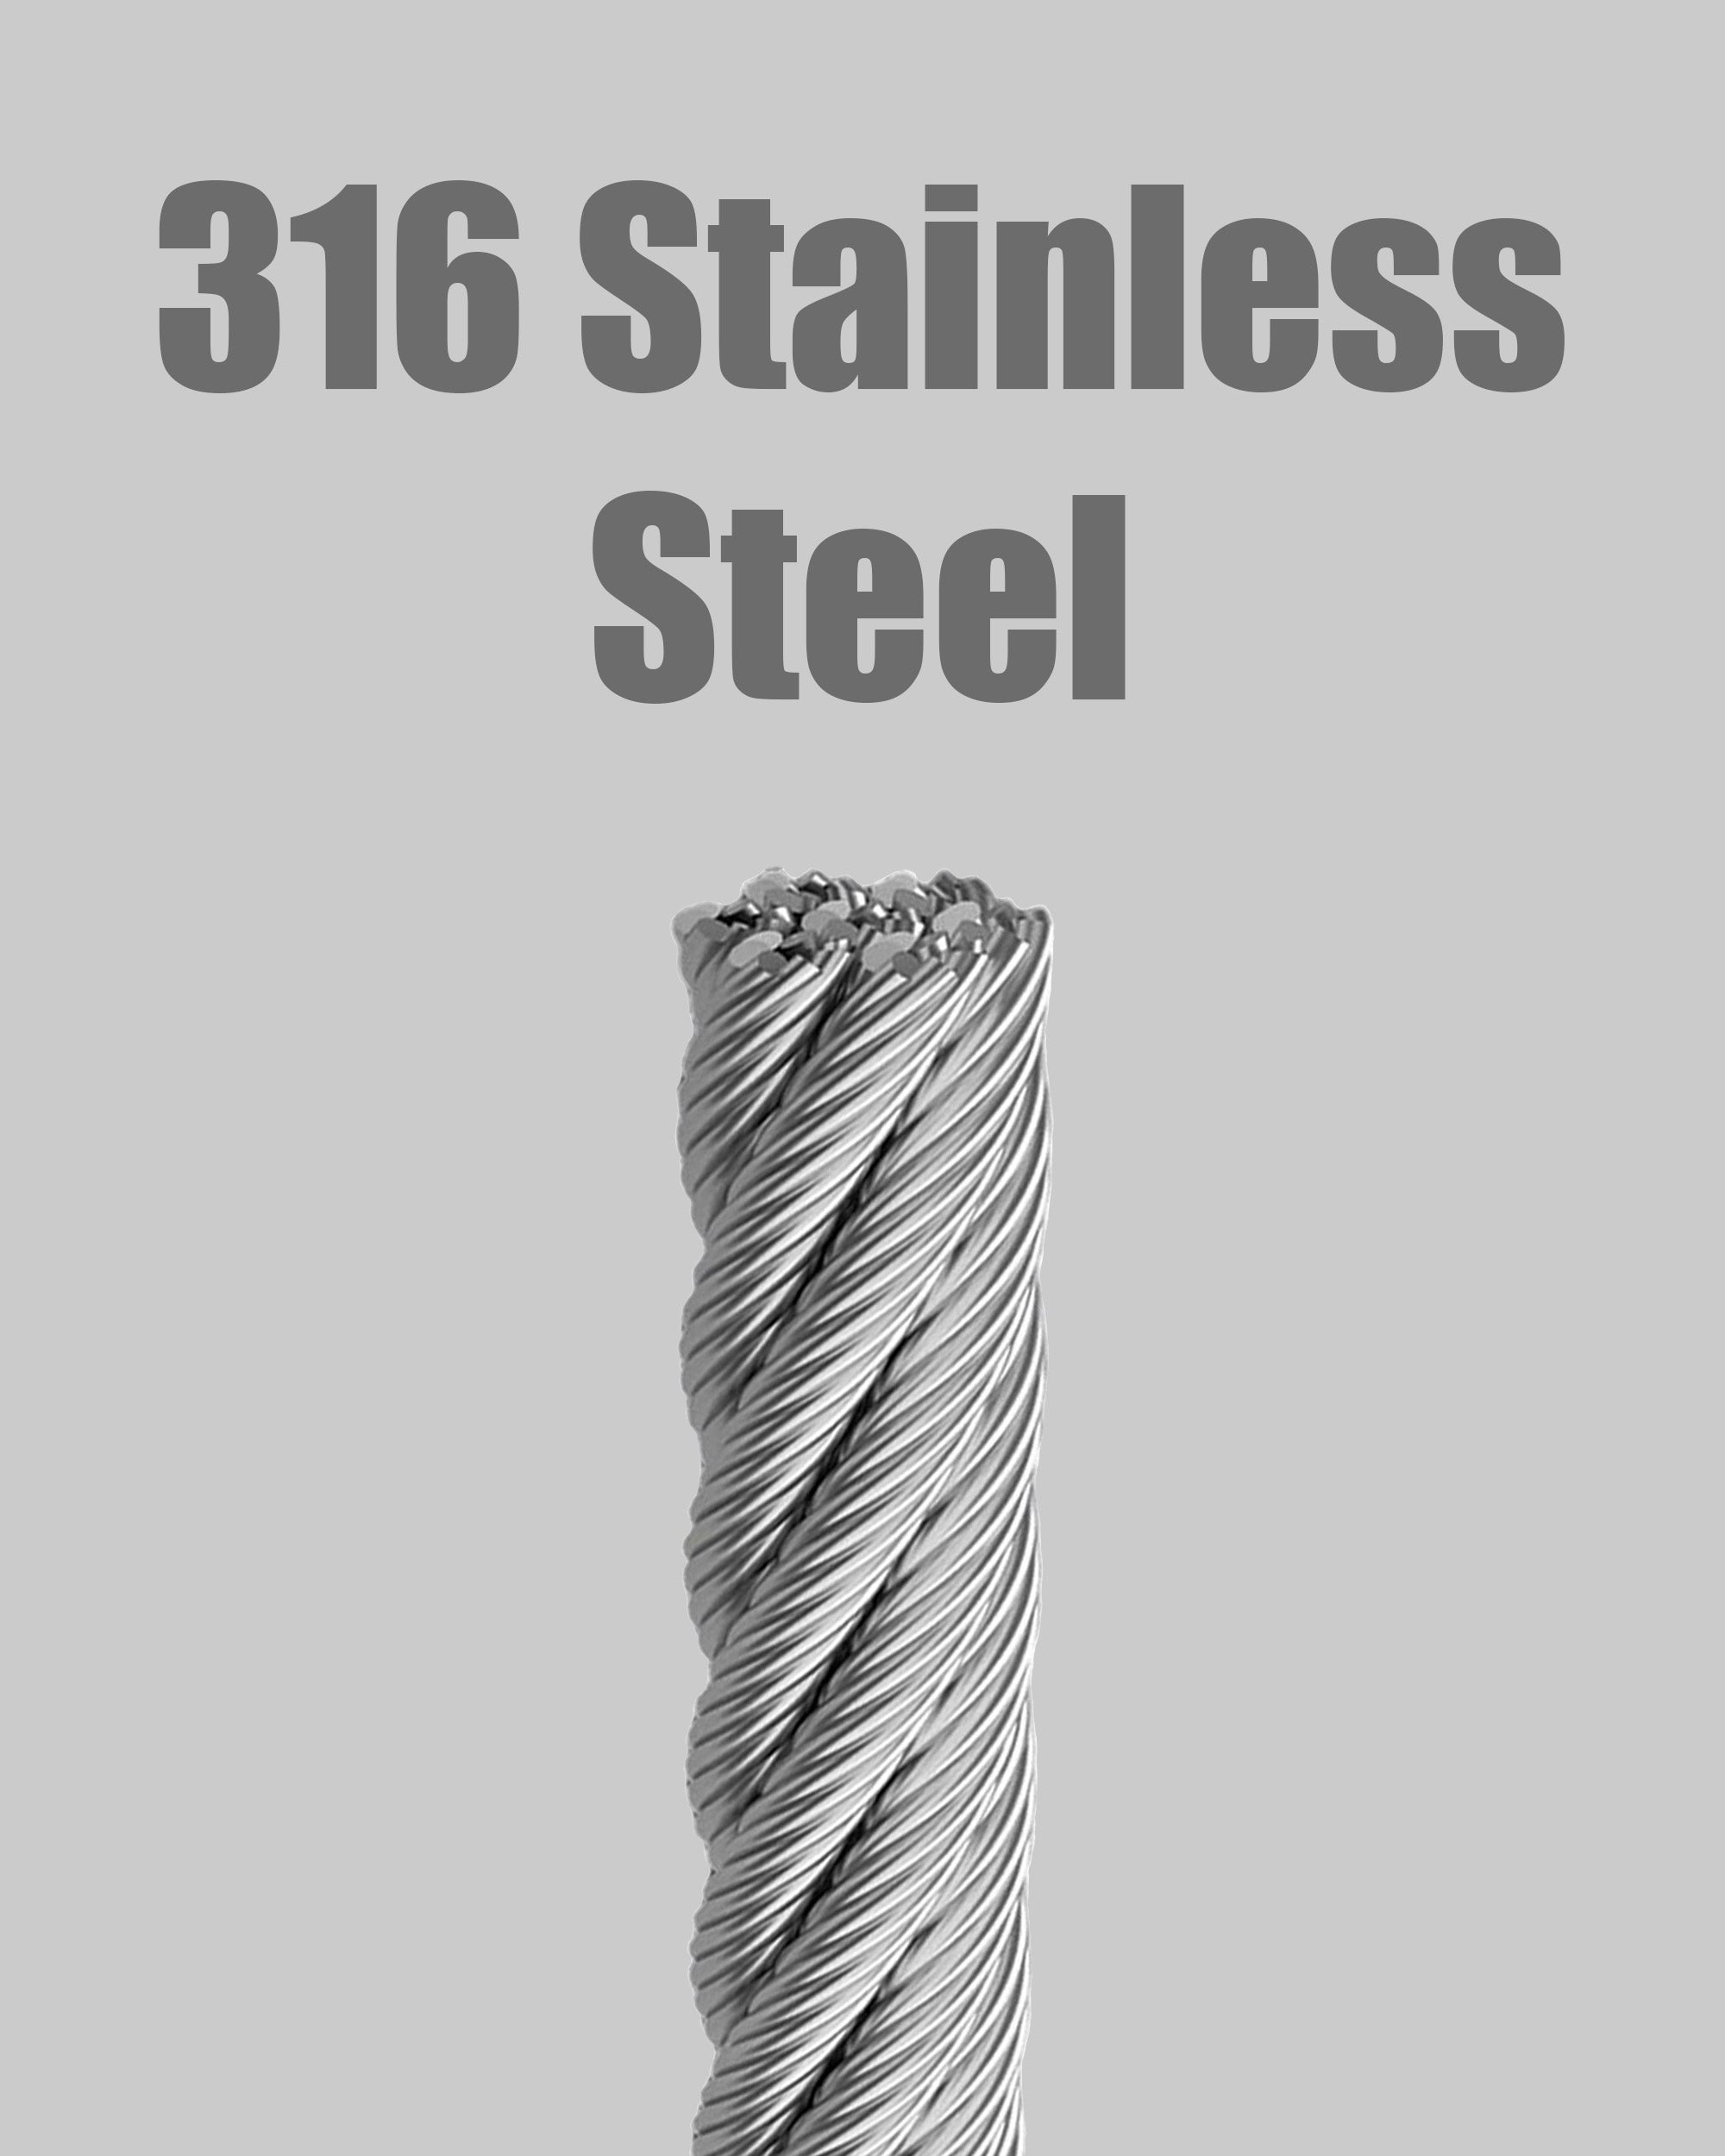 500FT 1/8 inch Cable 7x7 Strands Construction Braided Stainless Wire Premium 316 Stainless Steel Deck Cable Railing for Outdoor, DIY Metal Wire Railing, Balustrades Projects